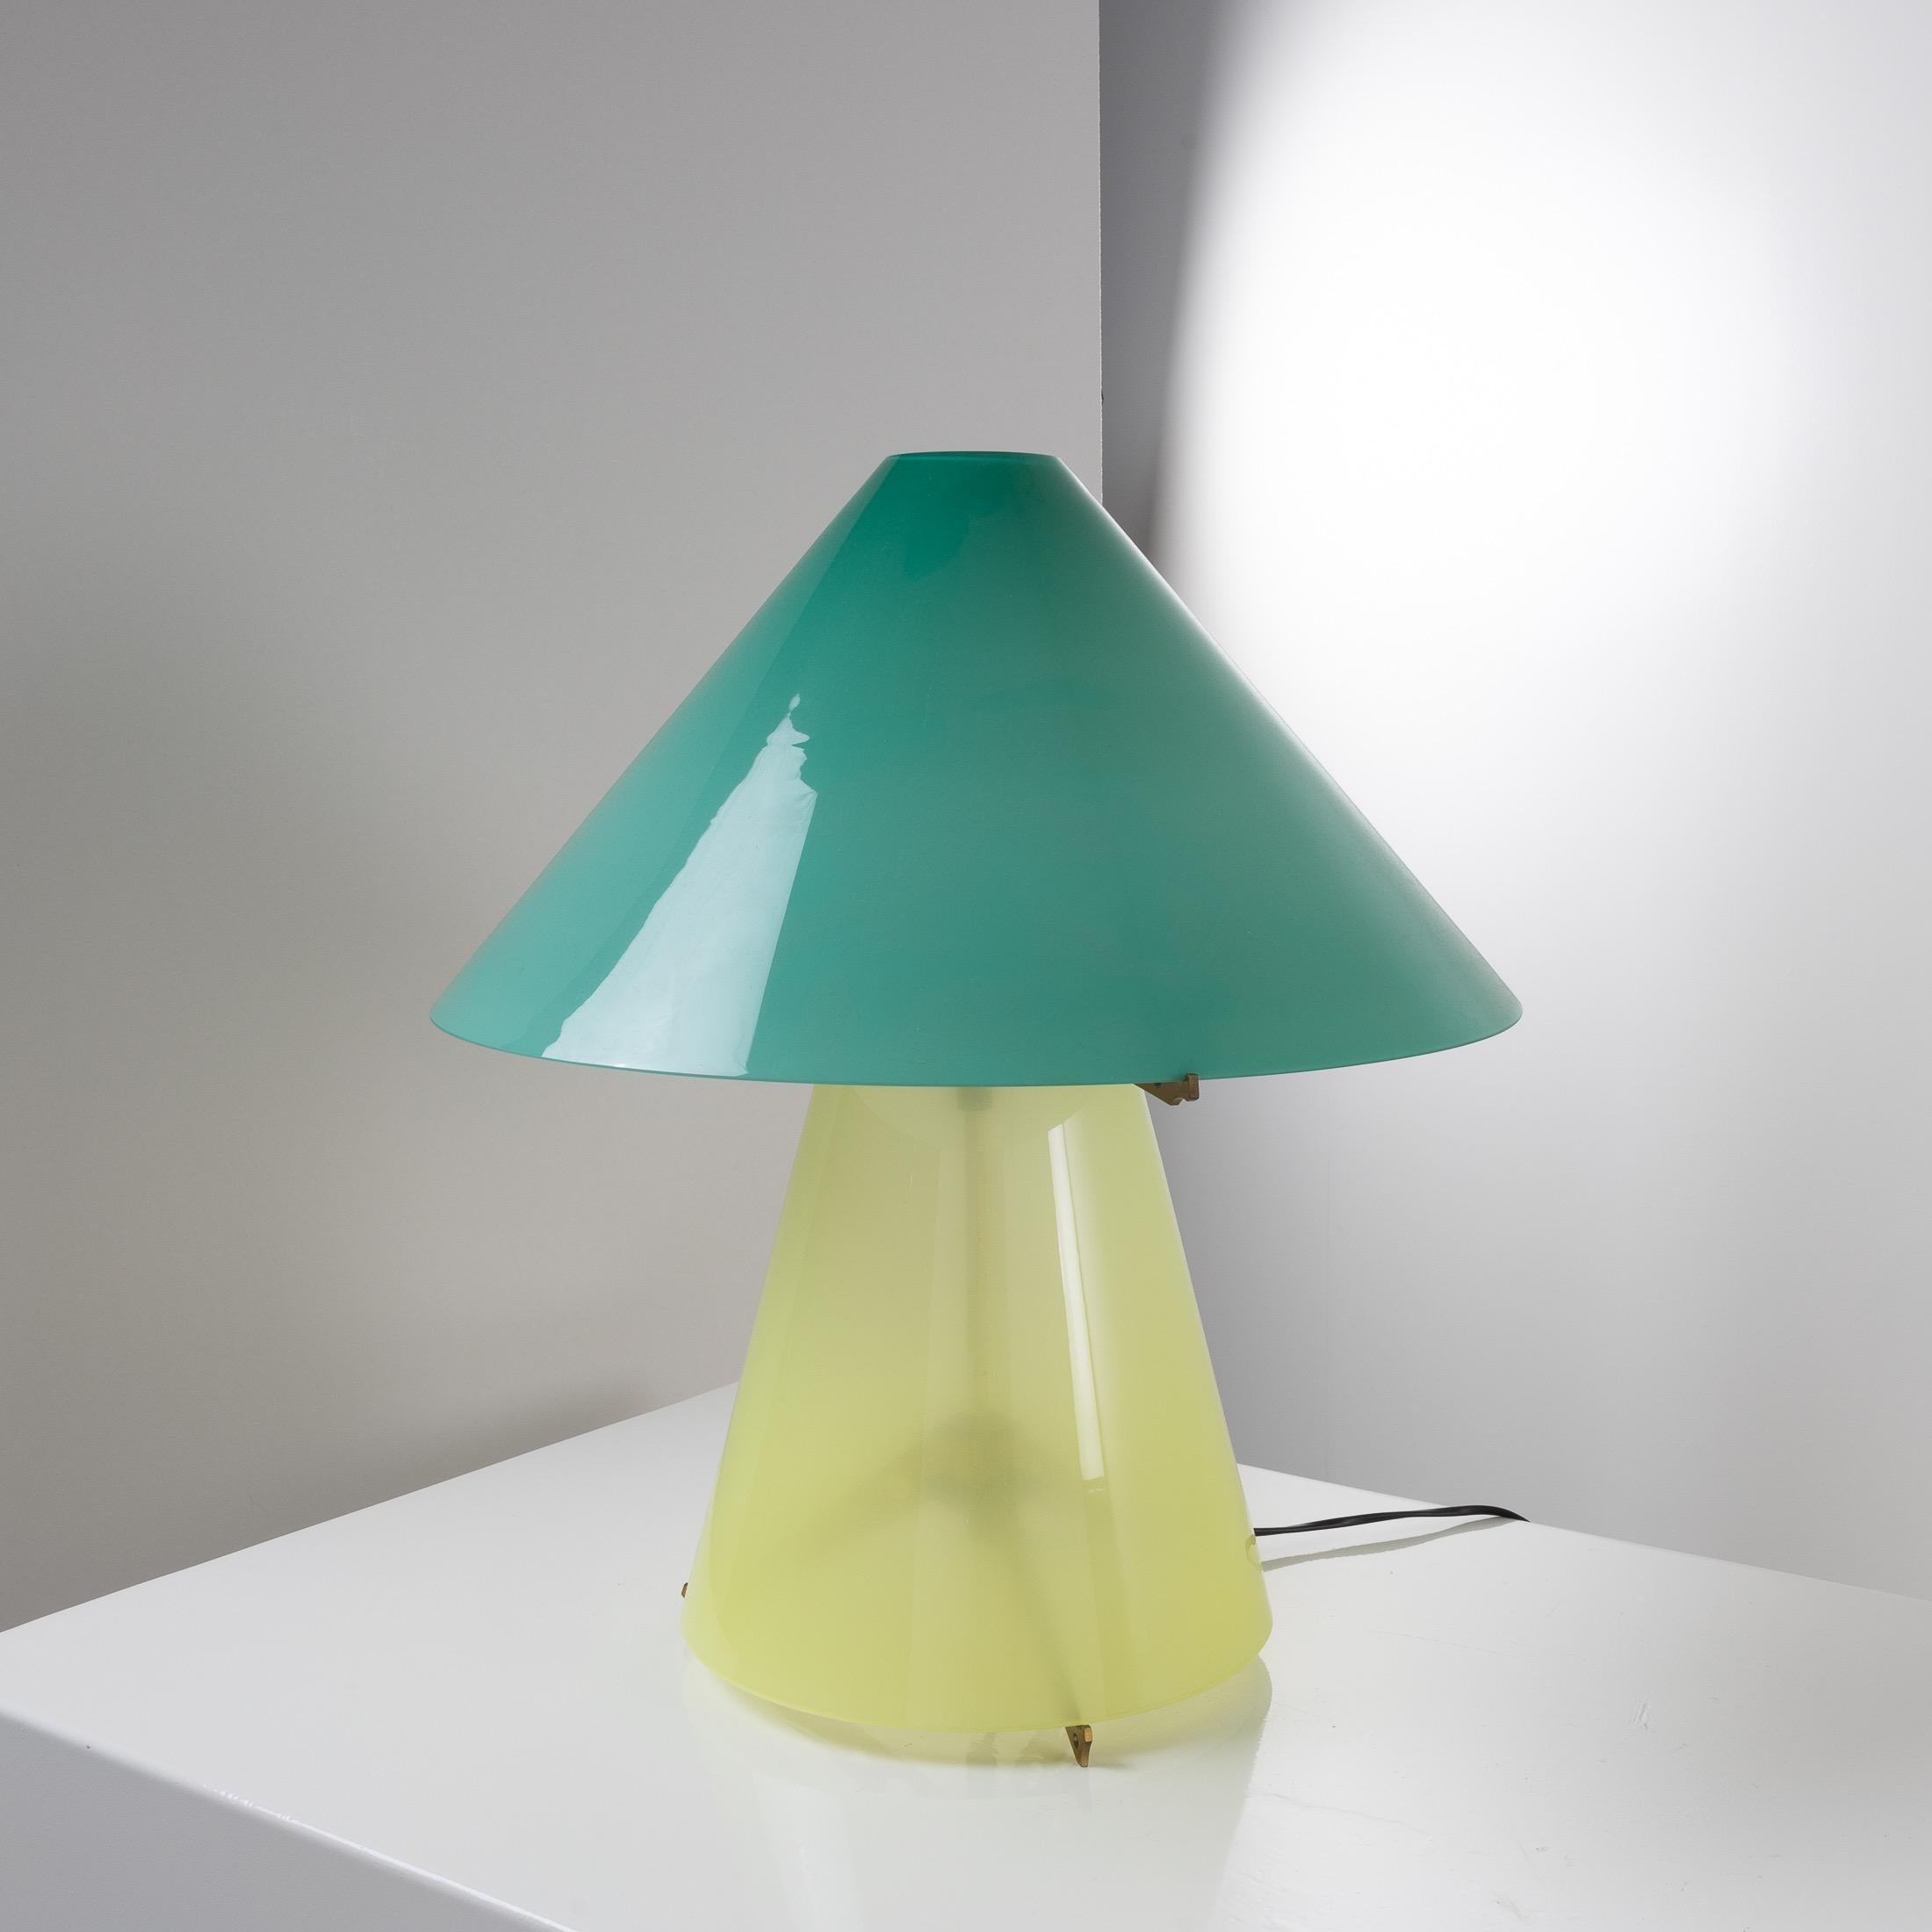 About this table lamp 